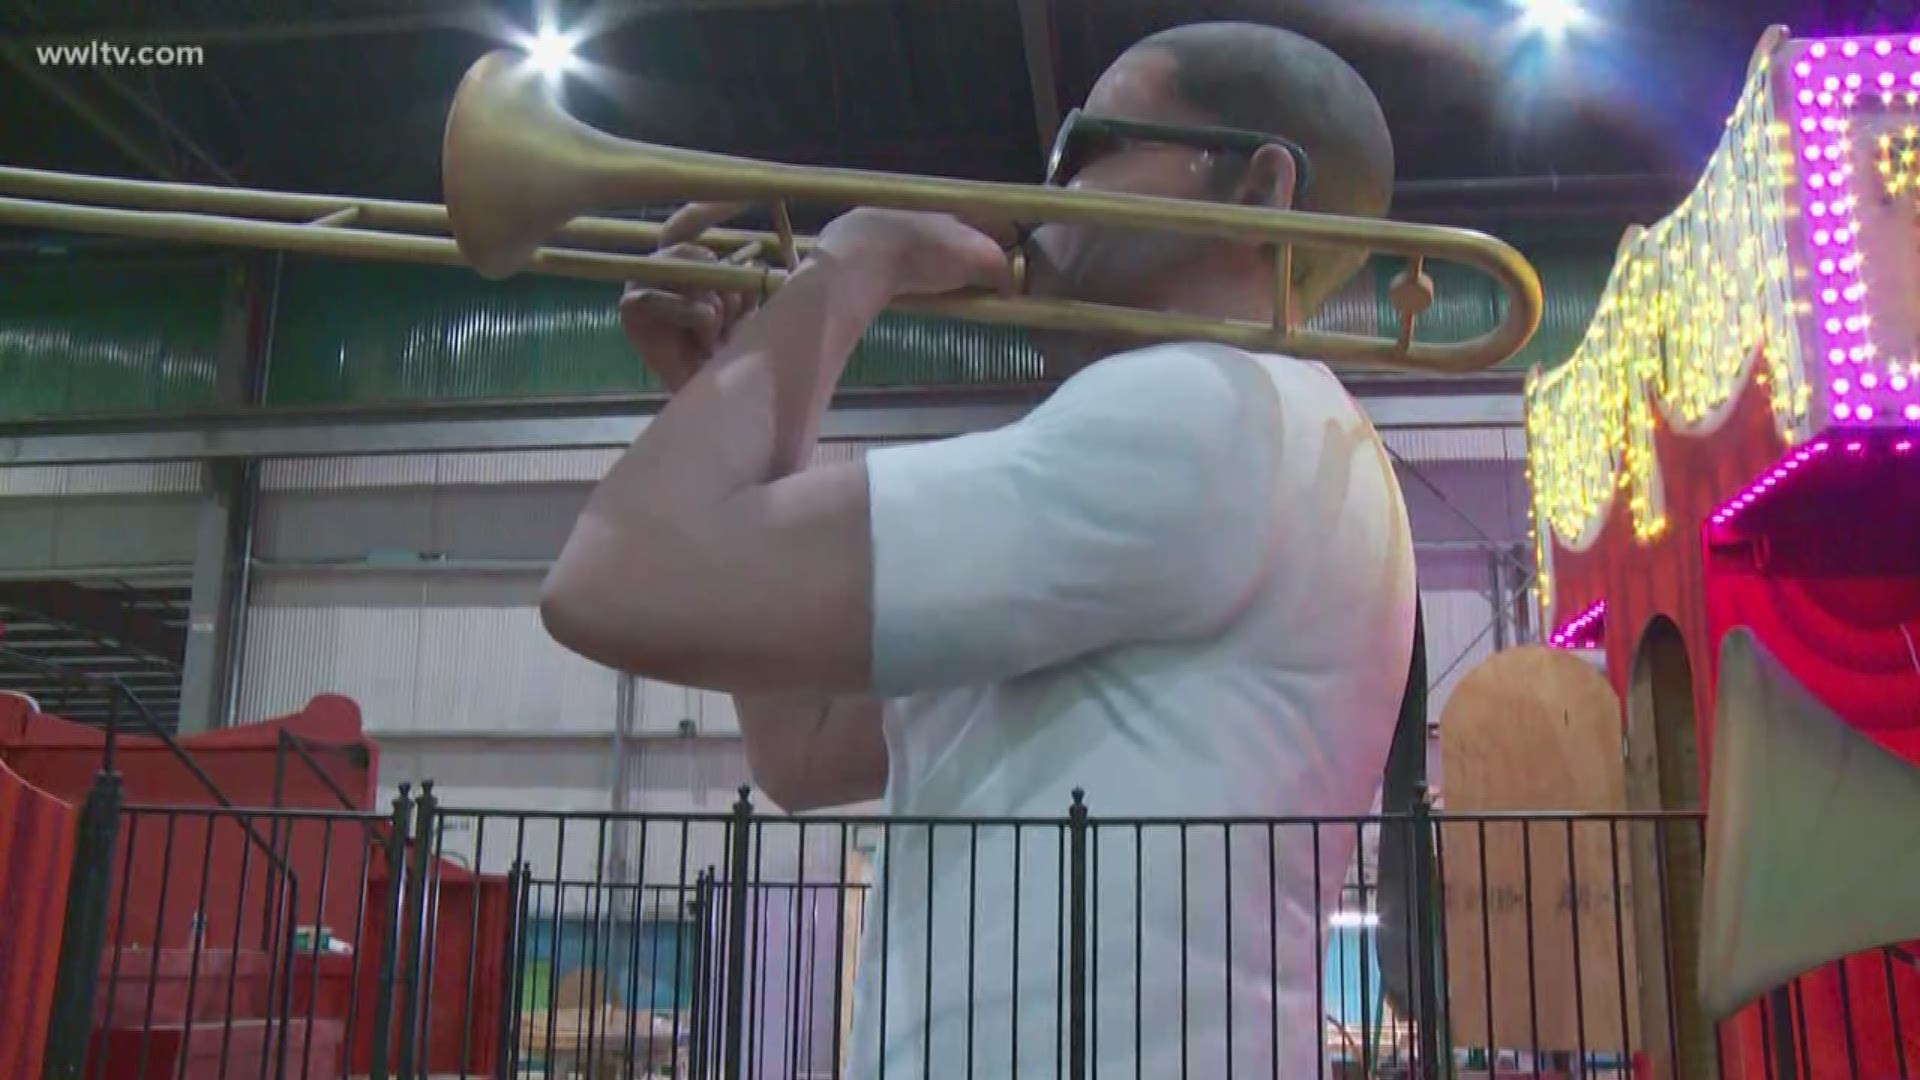 Trombone Shorty is featured on a new super float debuting Saturday in the Krewe of Freret parade.